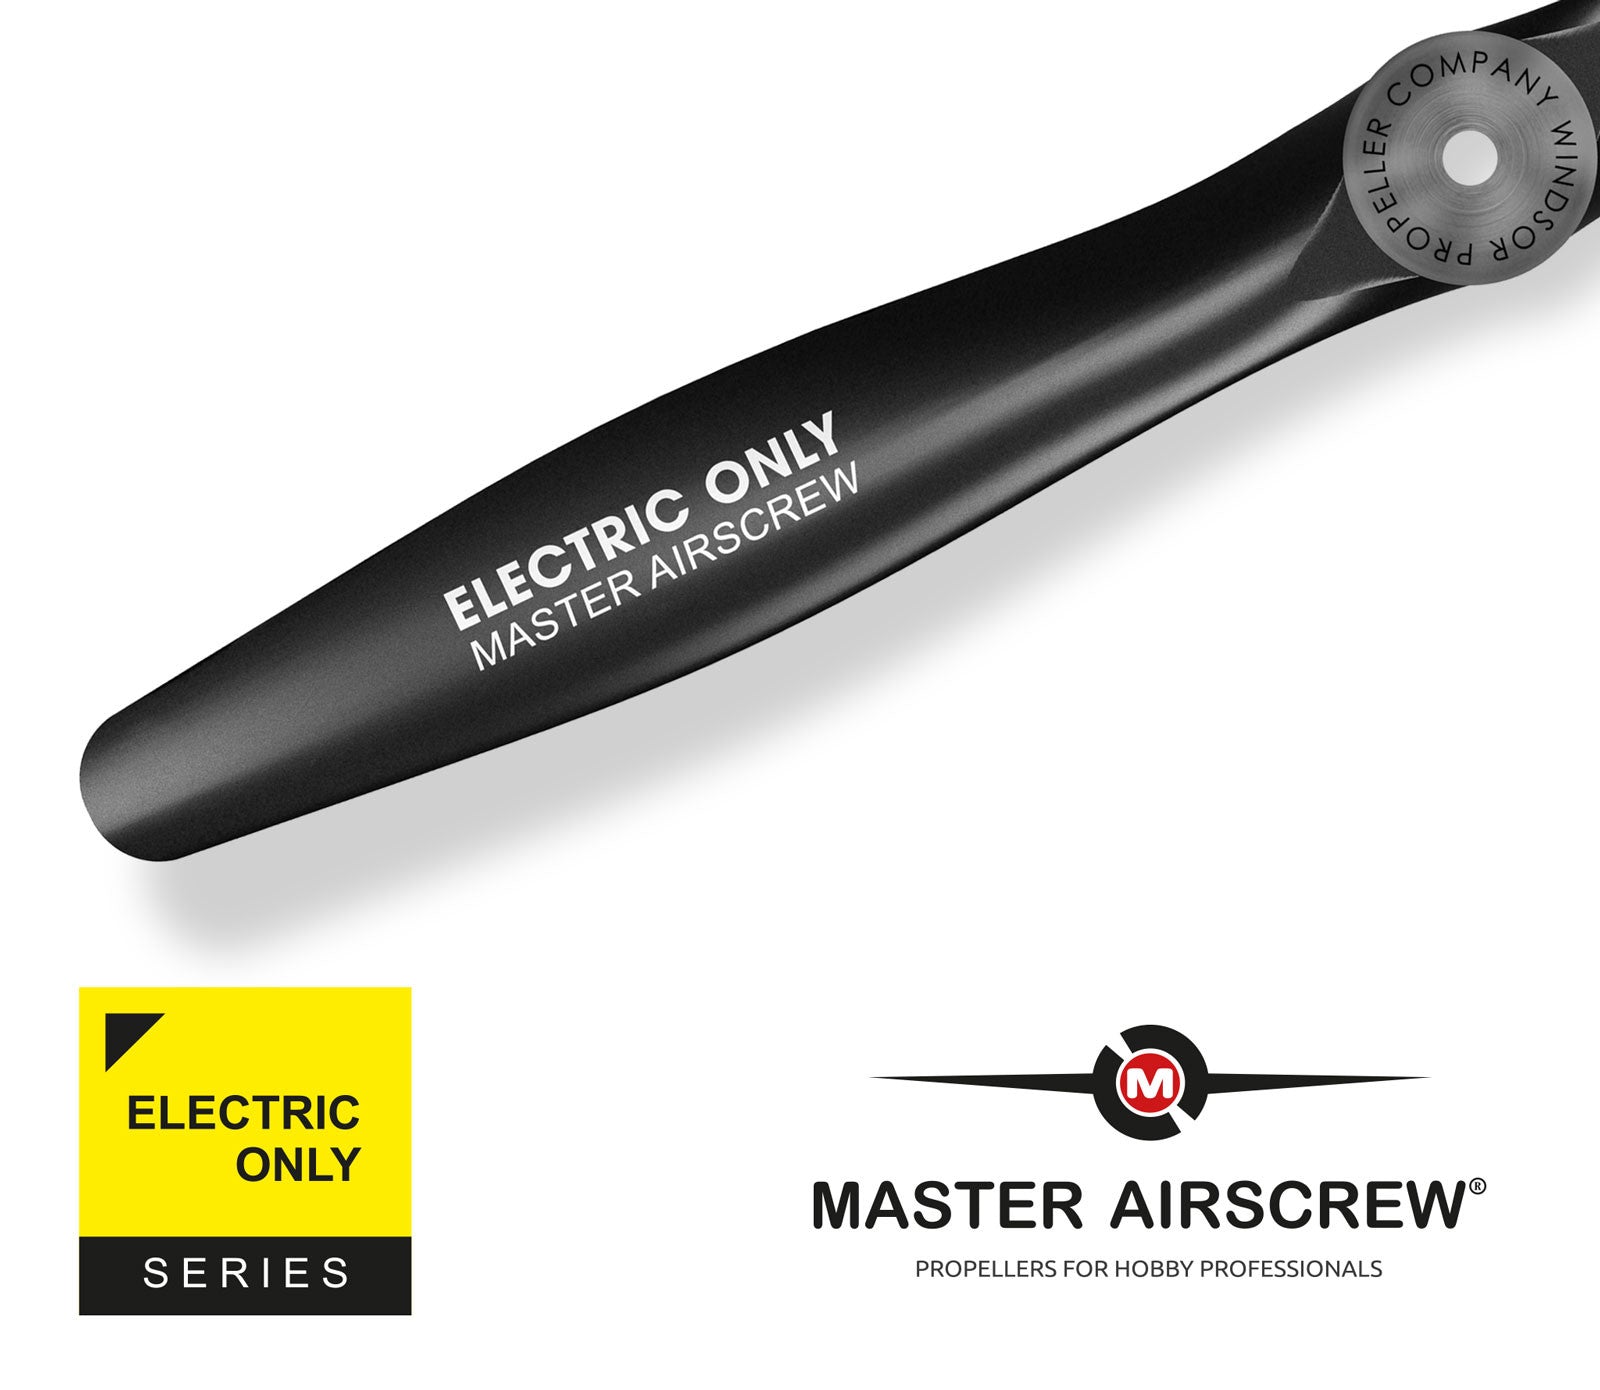 Electric Only - 12x8 Propeller - Master Airscrew